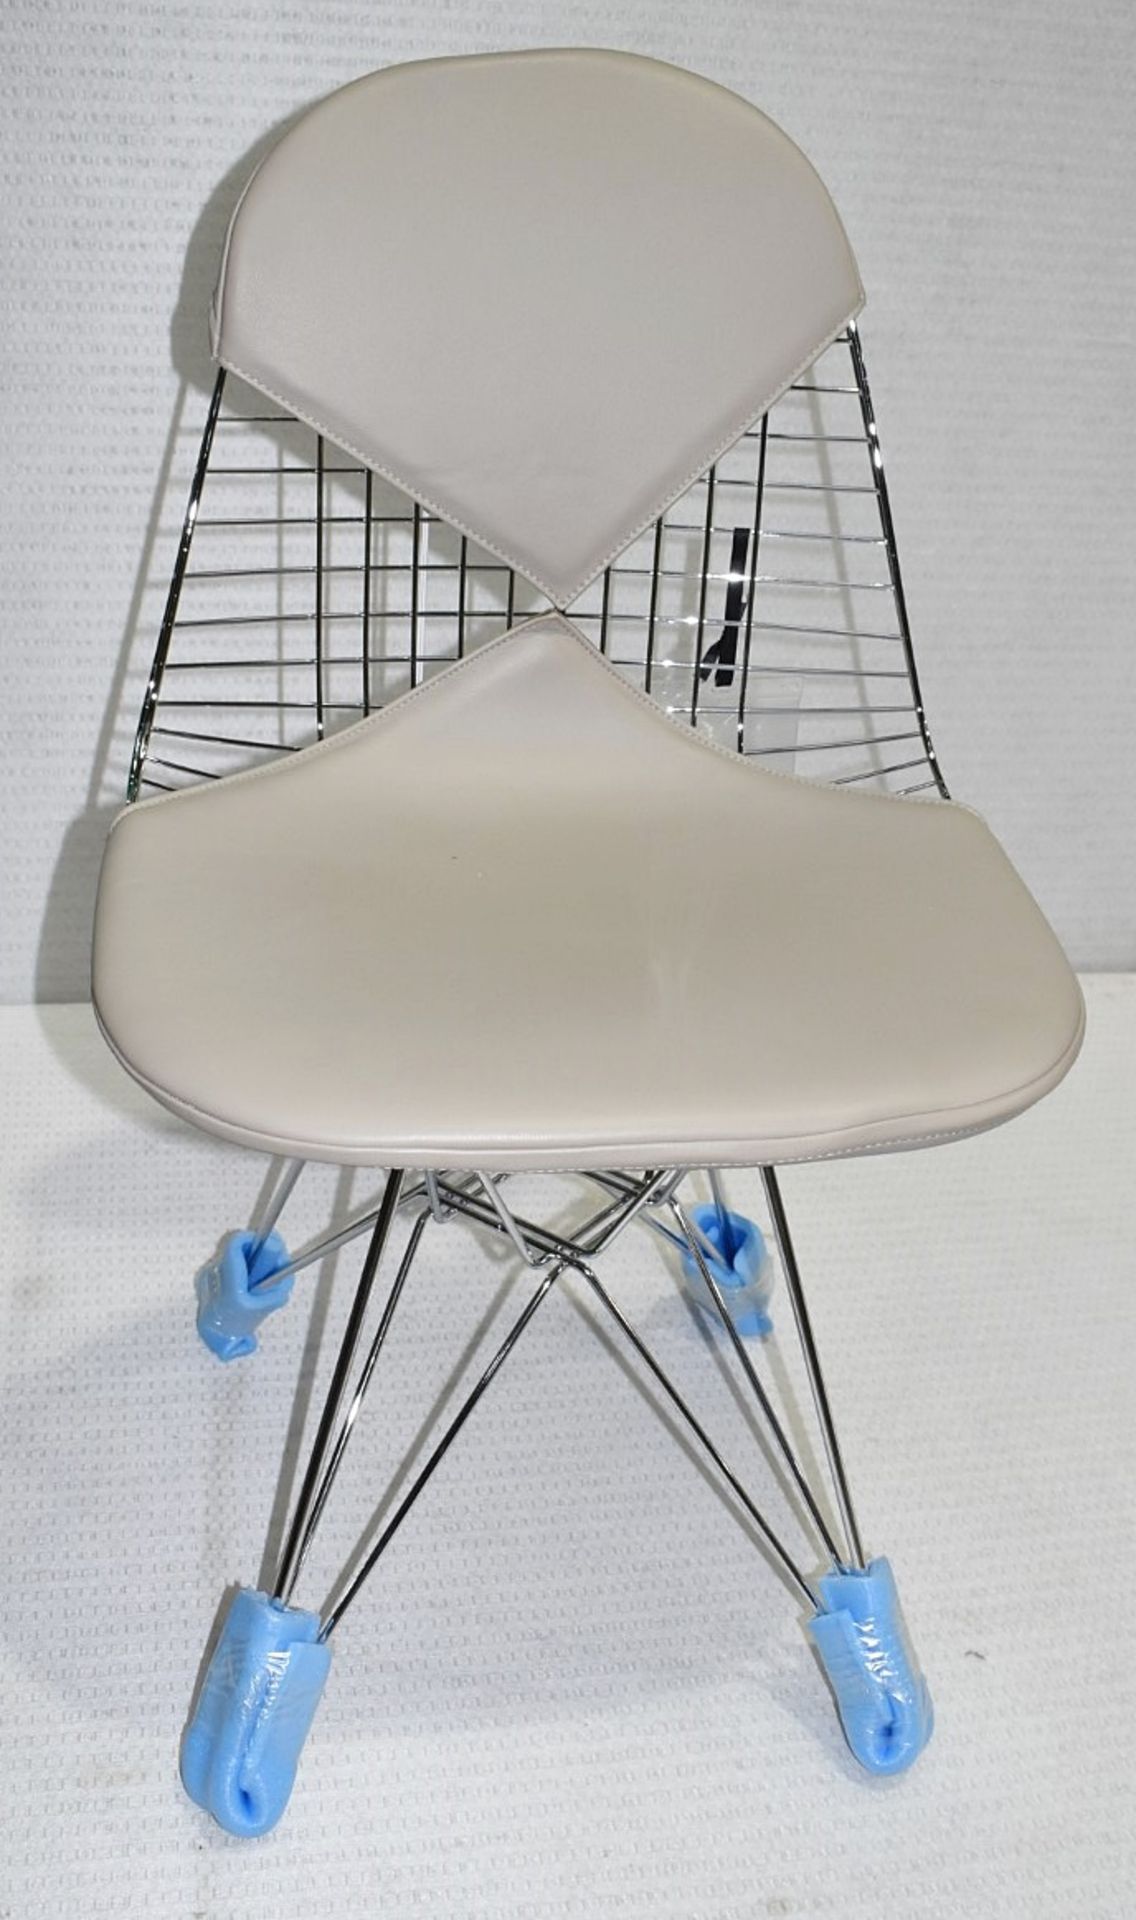 1 x VITRA Eames 'Wire DKR-2' Designer Leather Upholstered Chair in Sand & Chrome - RRP £660.00 - Image 2 of 10